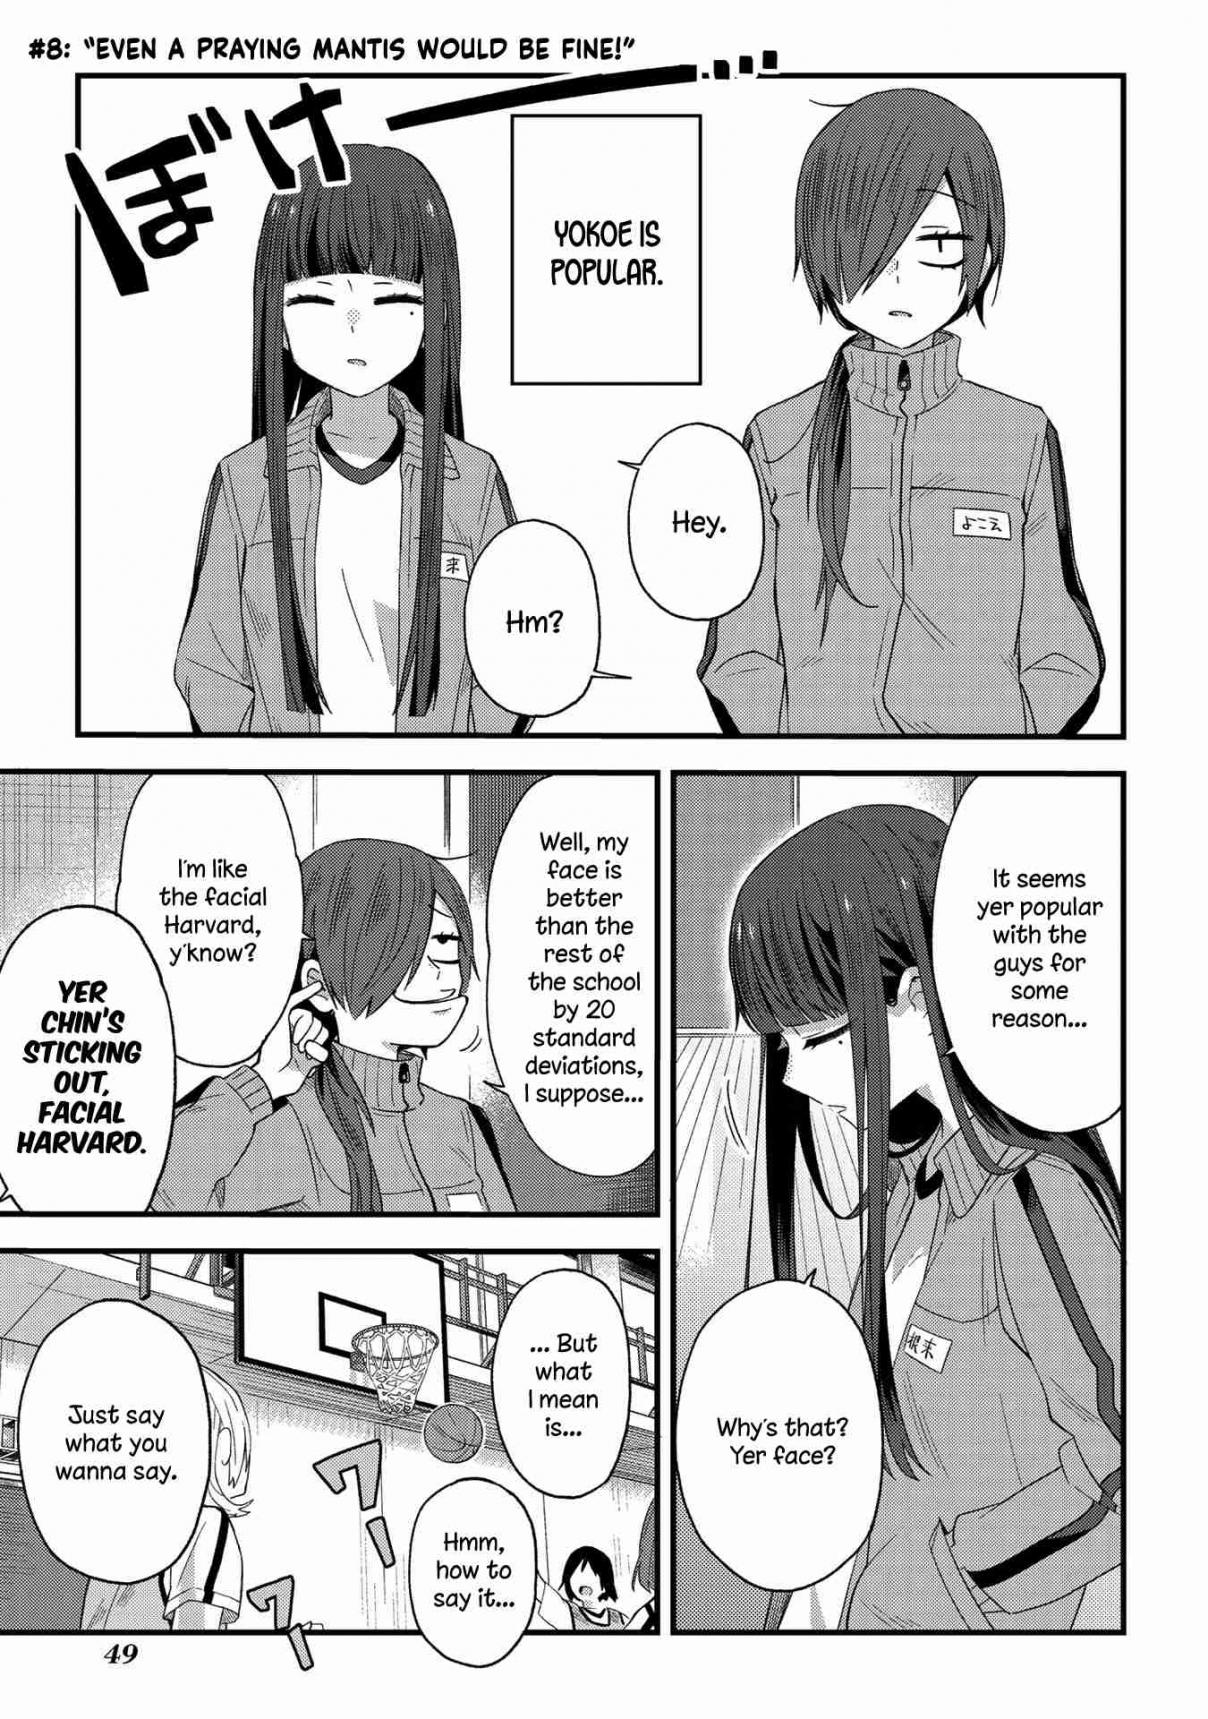 School Zone Vol. 1 Ch. 8 Even a praying mantis would be fine!